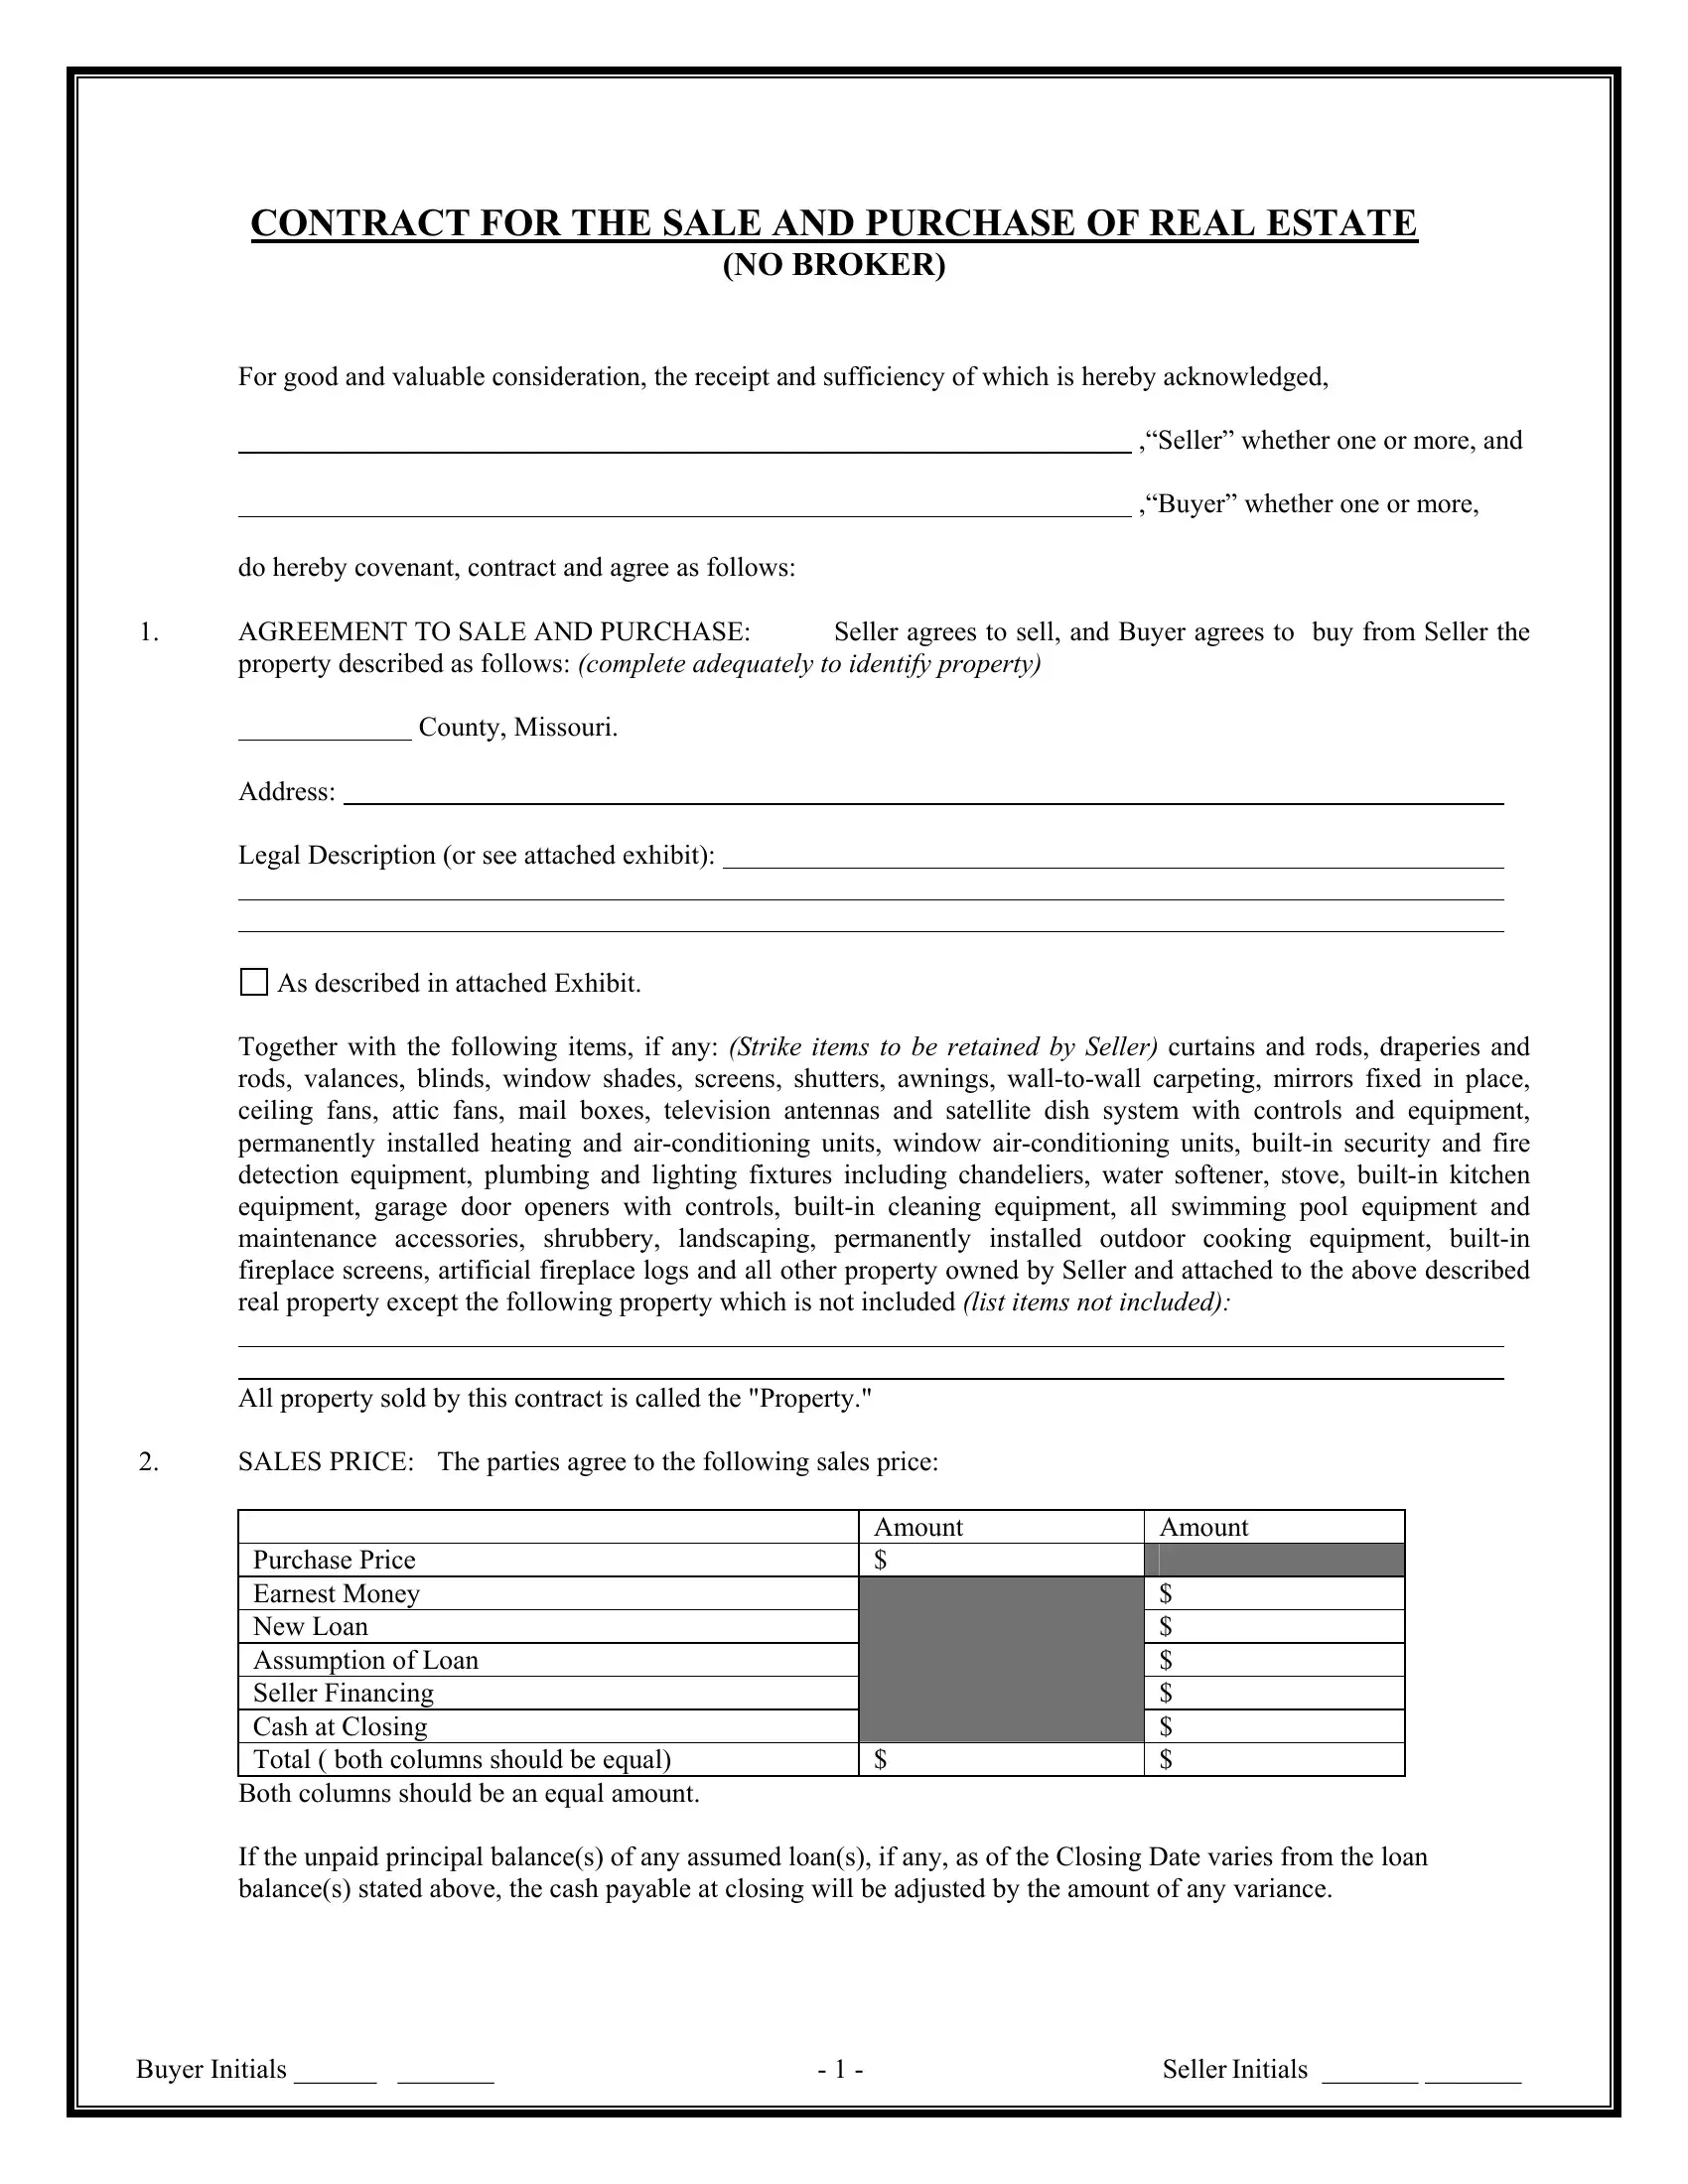 missouri-real-estate-contract-pdf-form-formspal